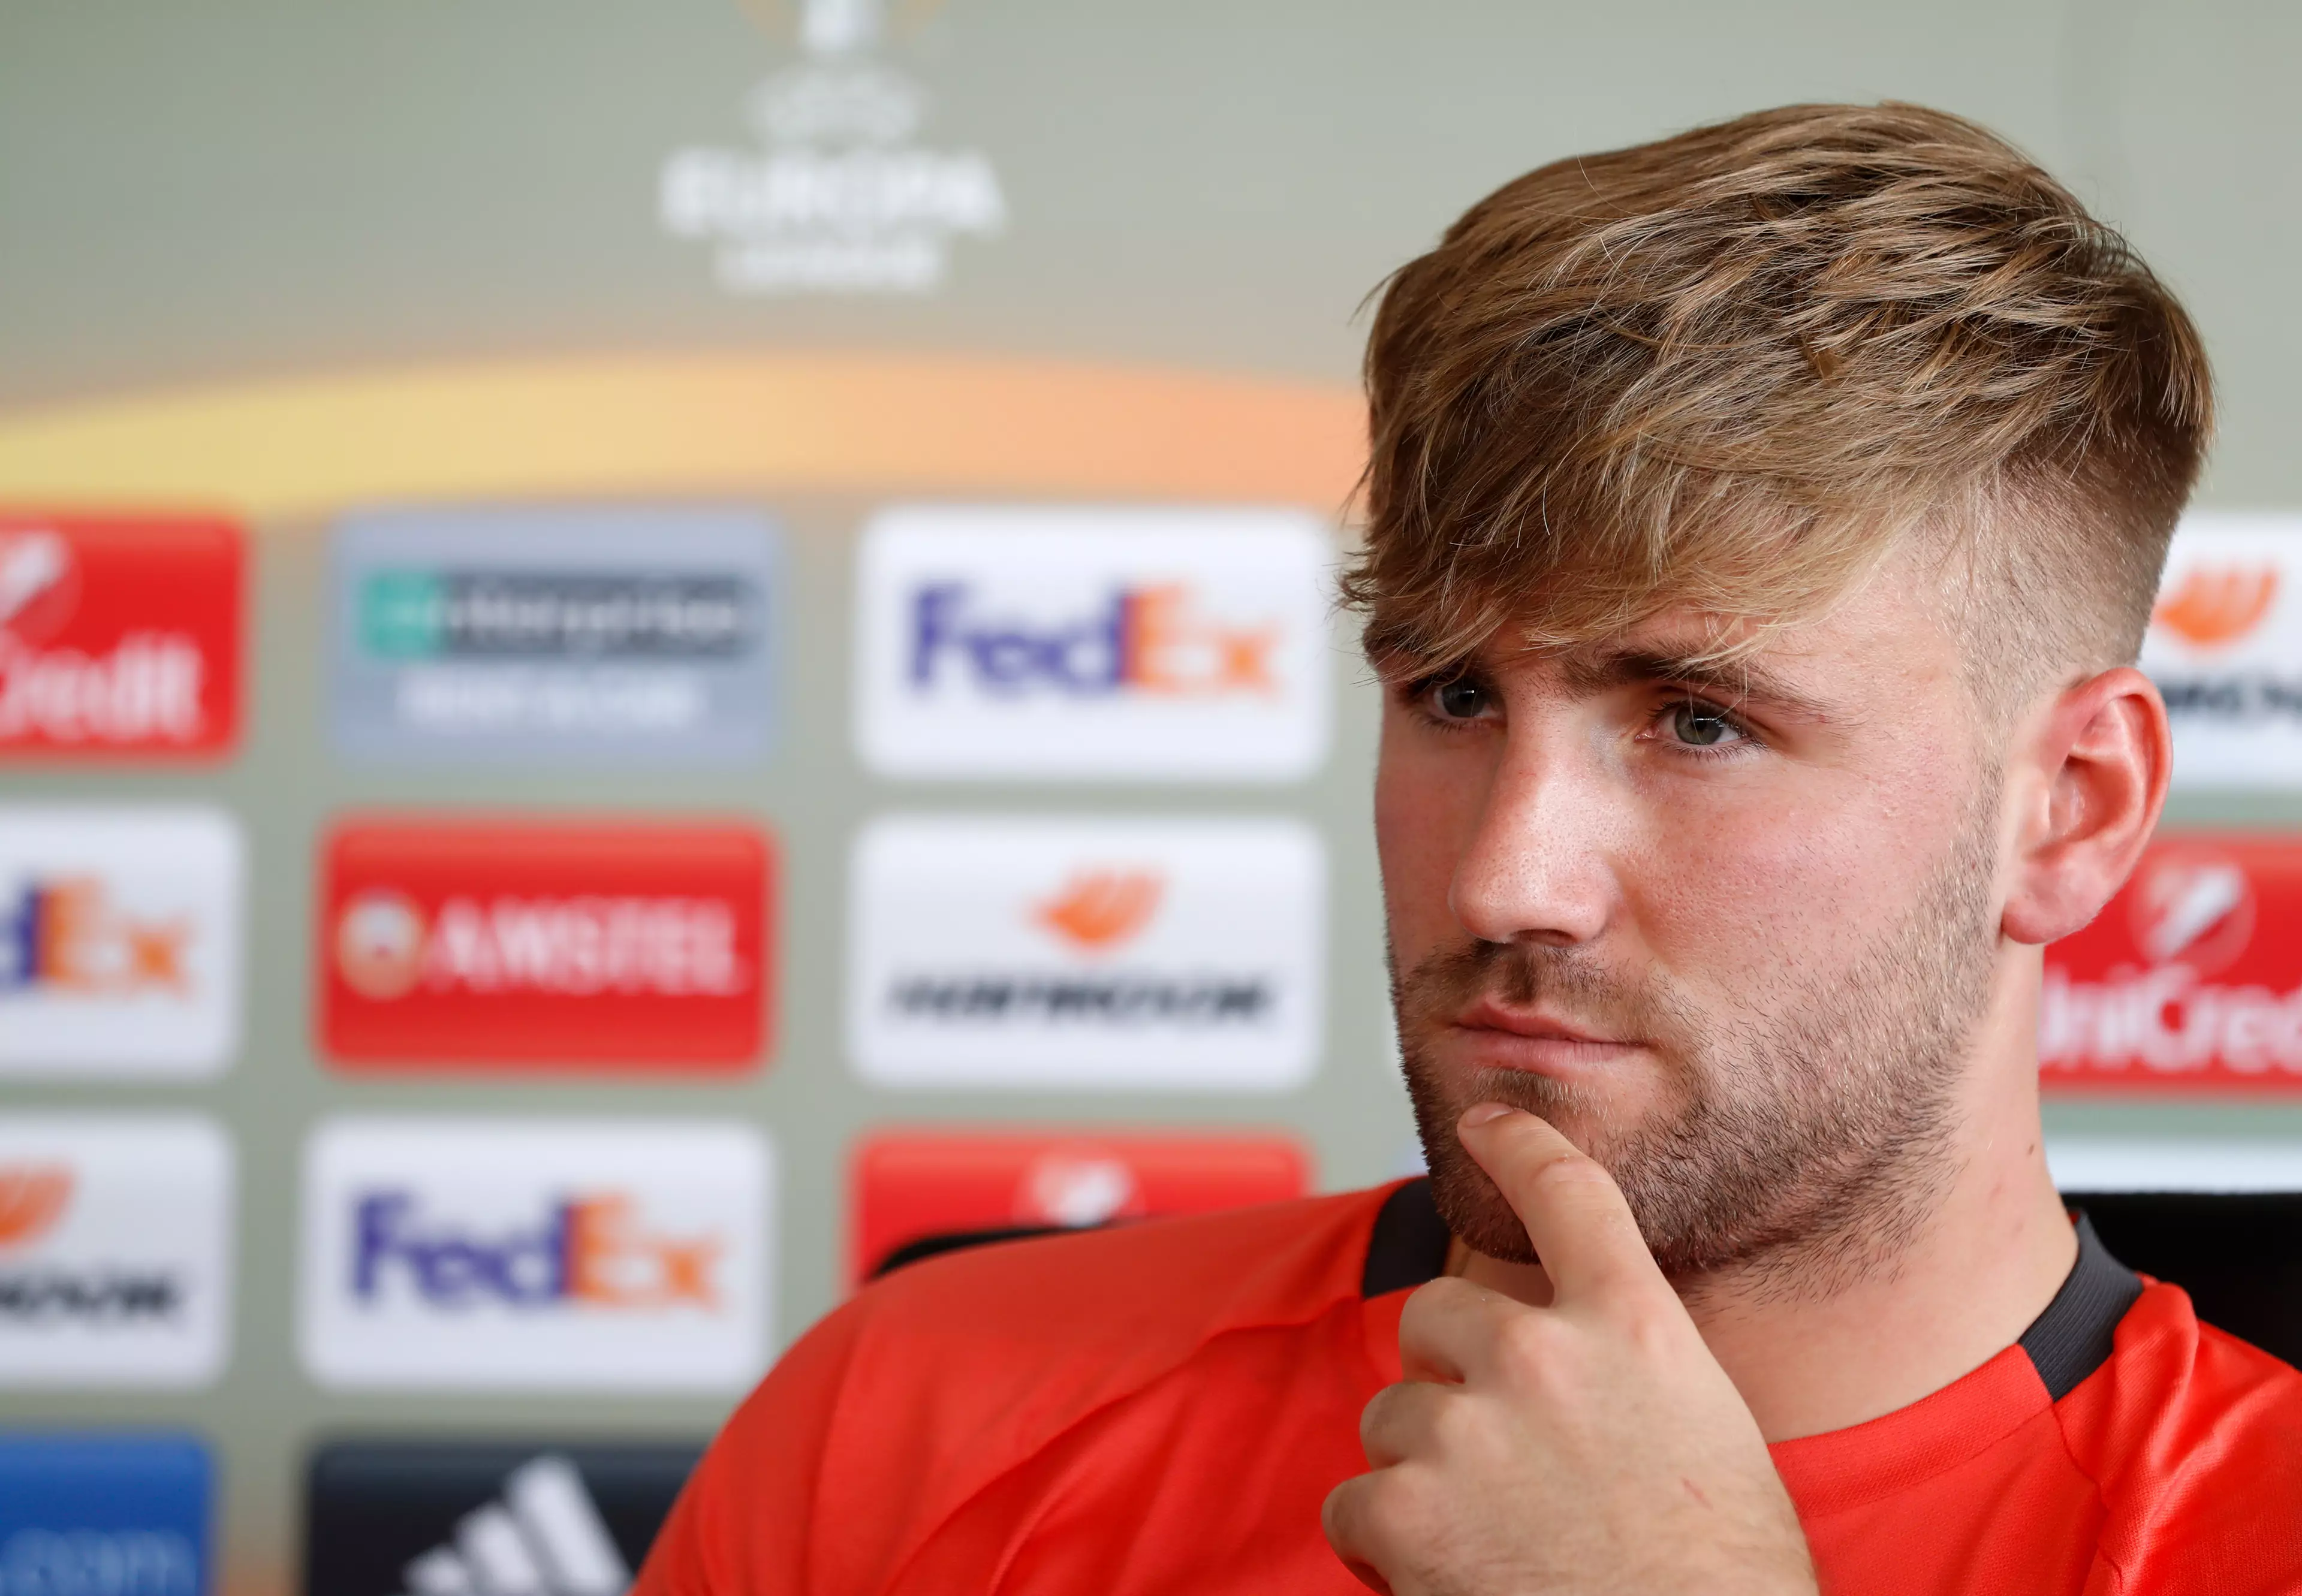 Luke Shaw's Brother Blasts Jose Mourinho In Foul-Mouth Twitter Rant